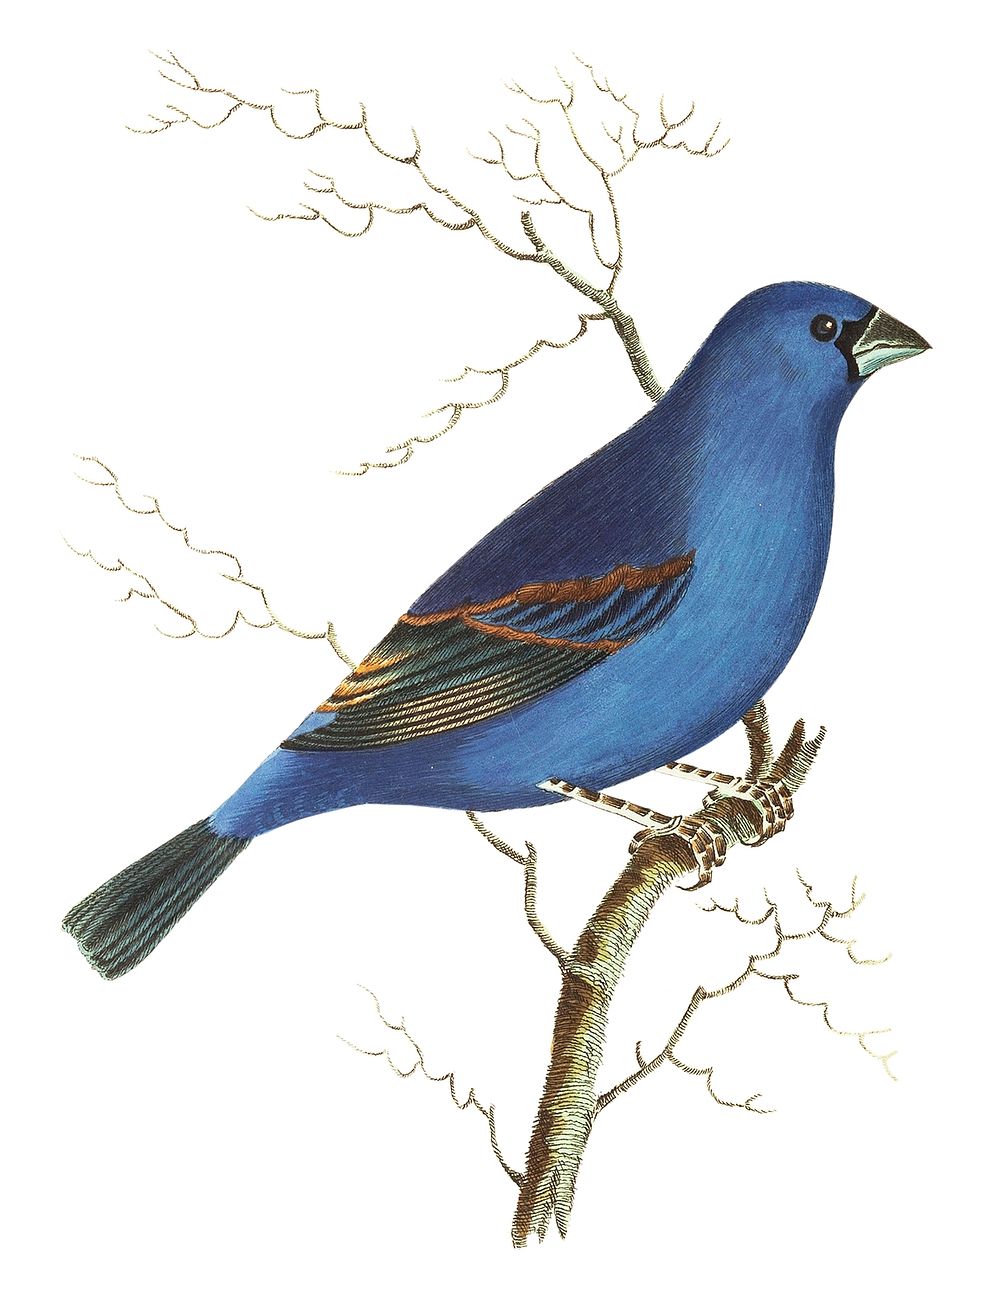 Blue grossbeak or Deep blue grossbeak illustration from The Naturalist's Miscellany (1789-1813) by George Shaw (1751-1813)